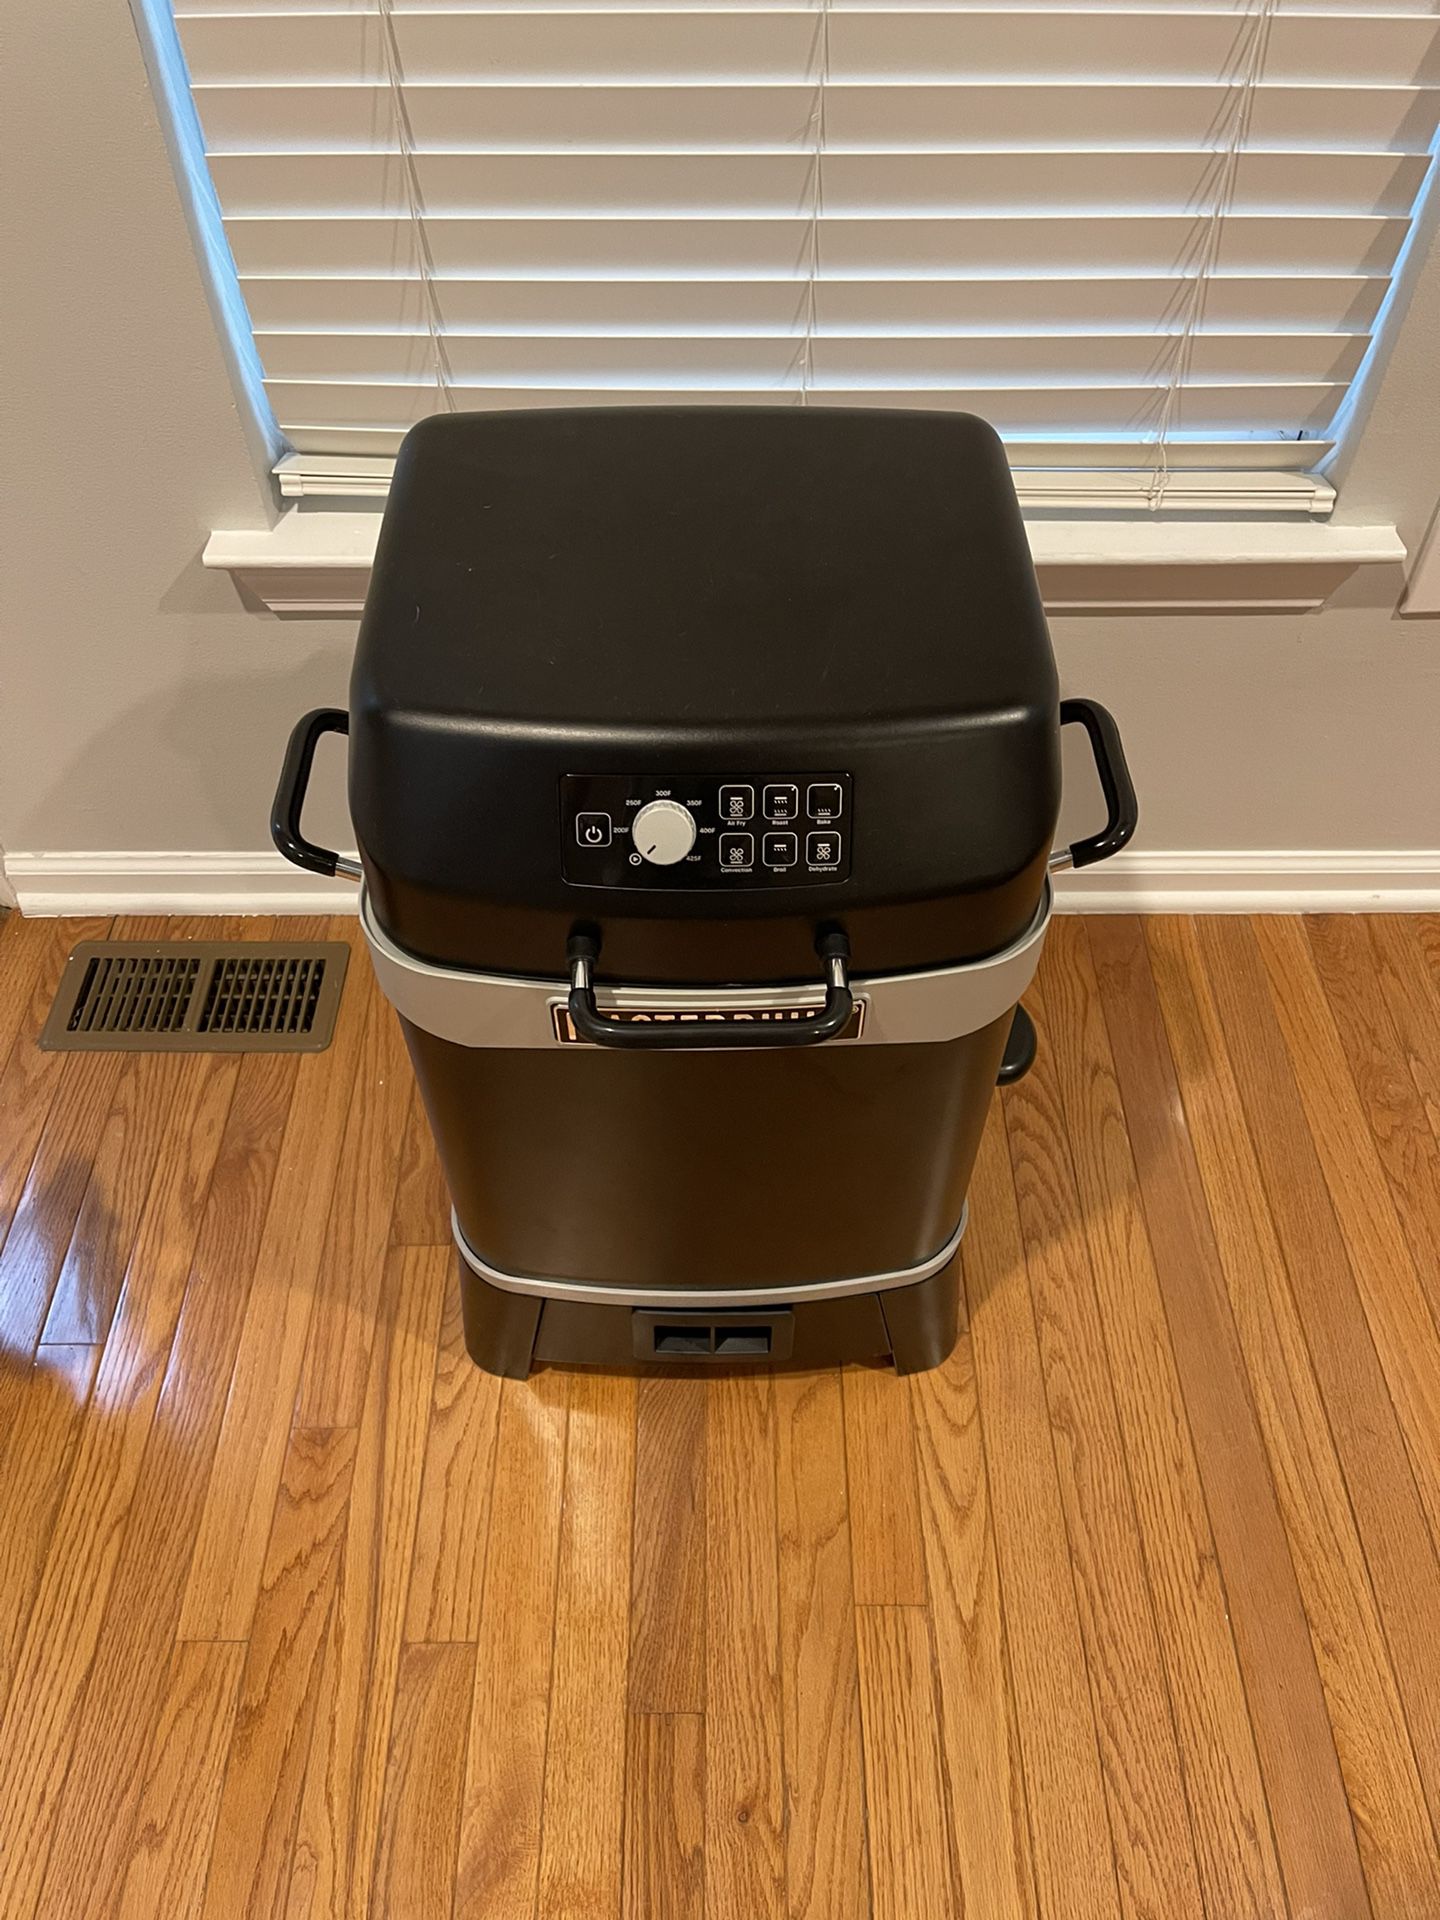 Masterbuilt 20 Quart 6-in-1 Outdoor Air Fryer – Grill Collection